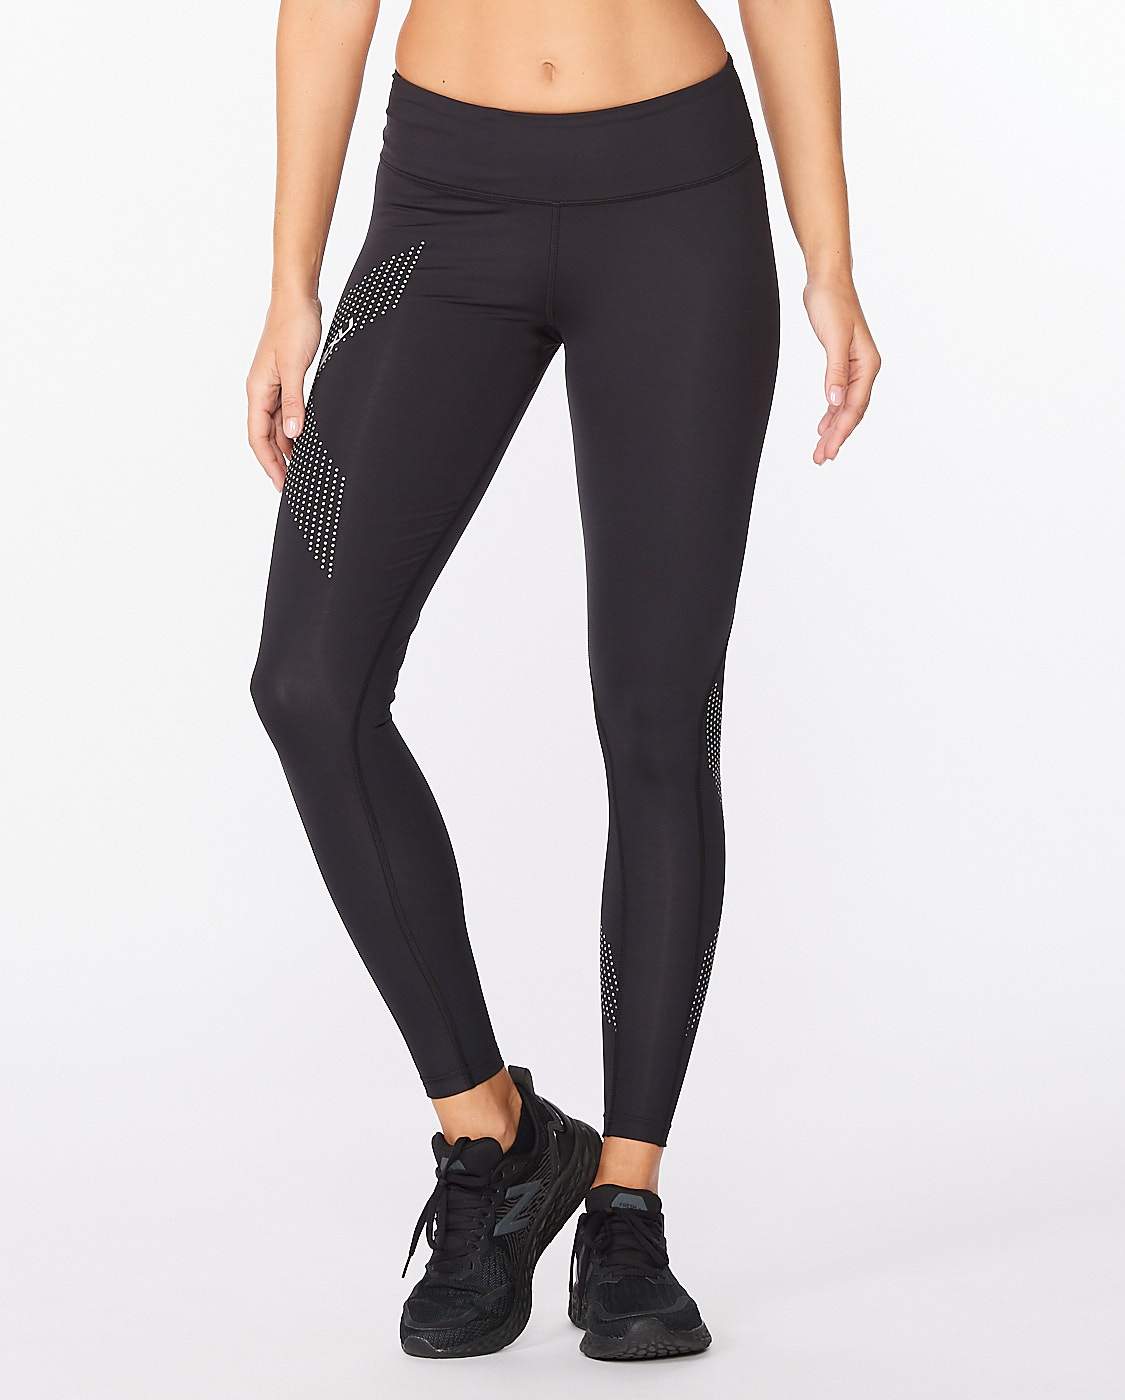 2XU Ignition Thermal Mid-Rise Womens Compression Tights - Black/Nero